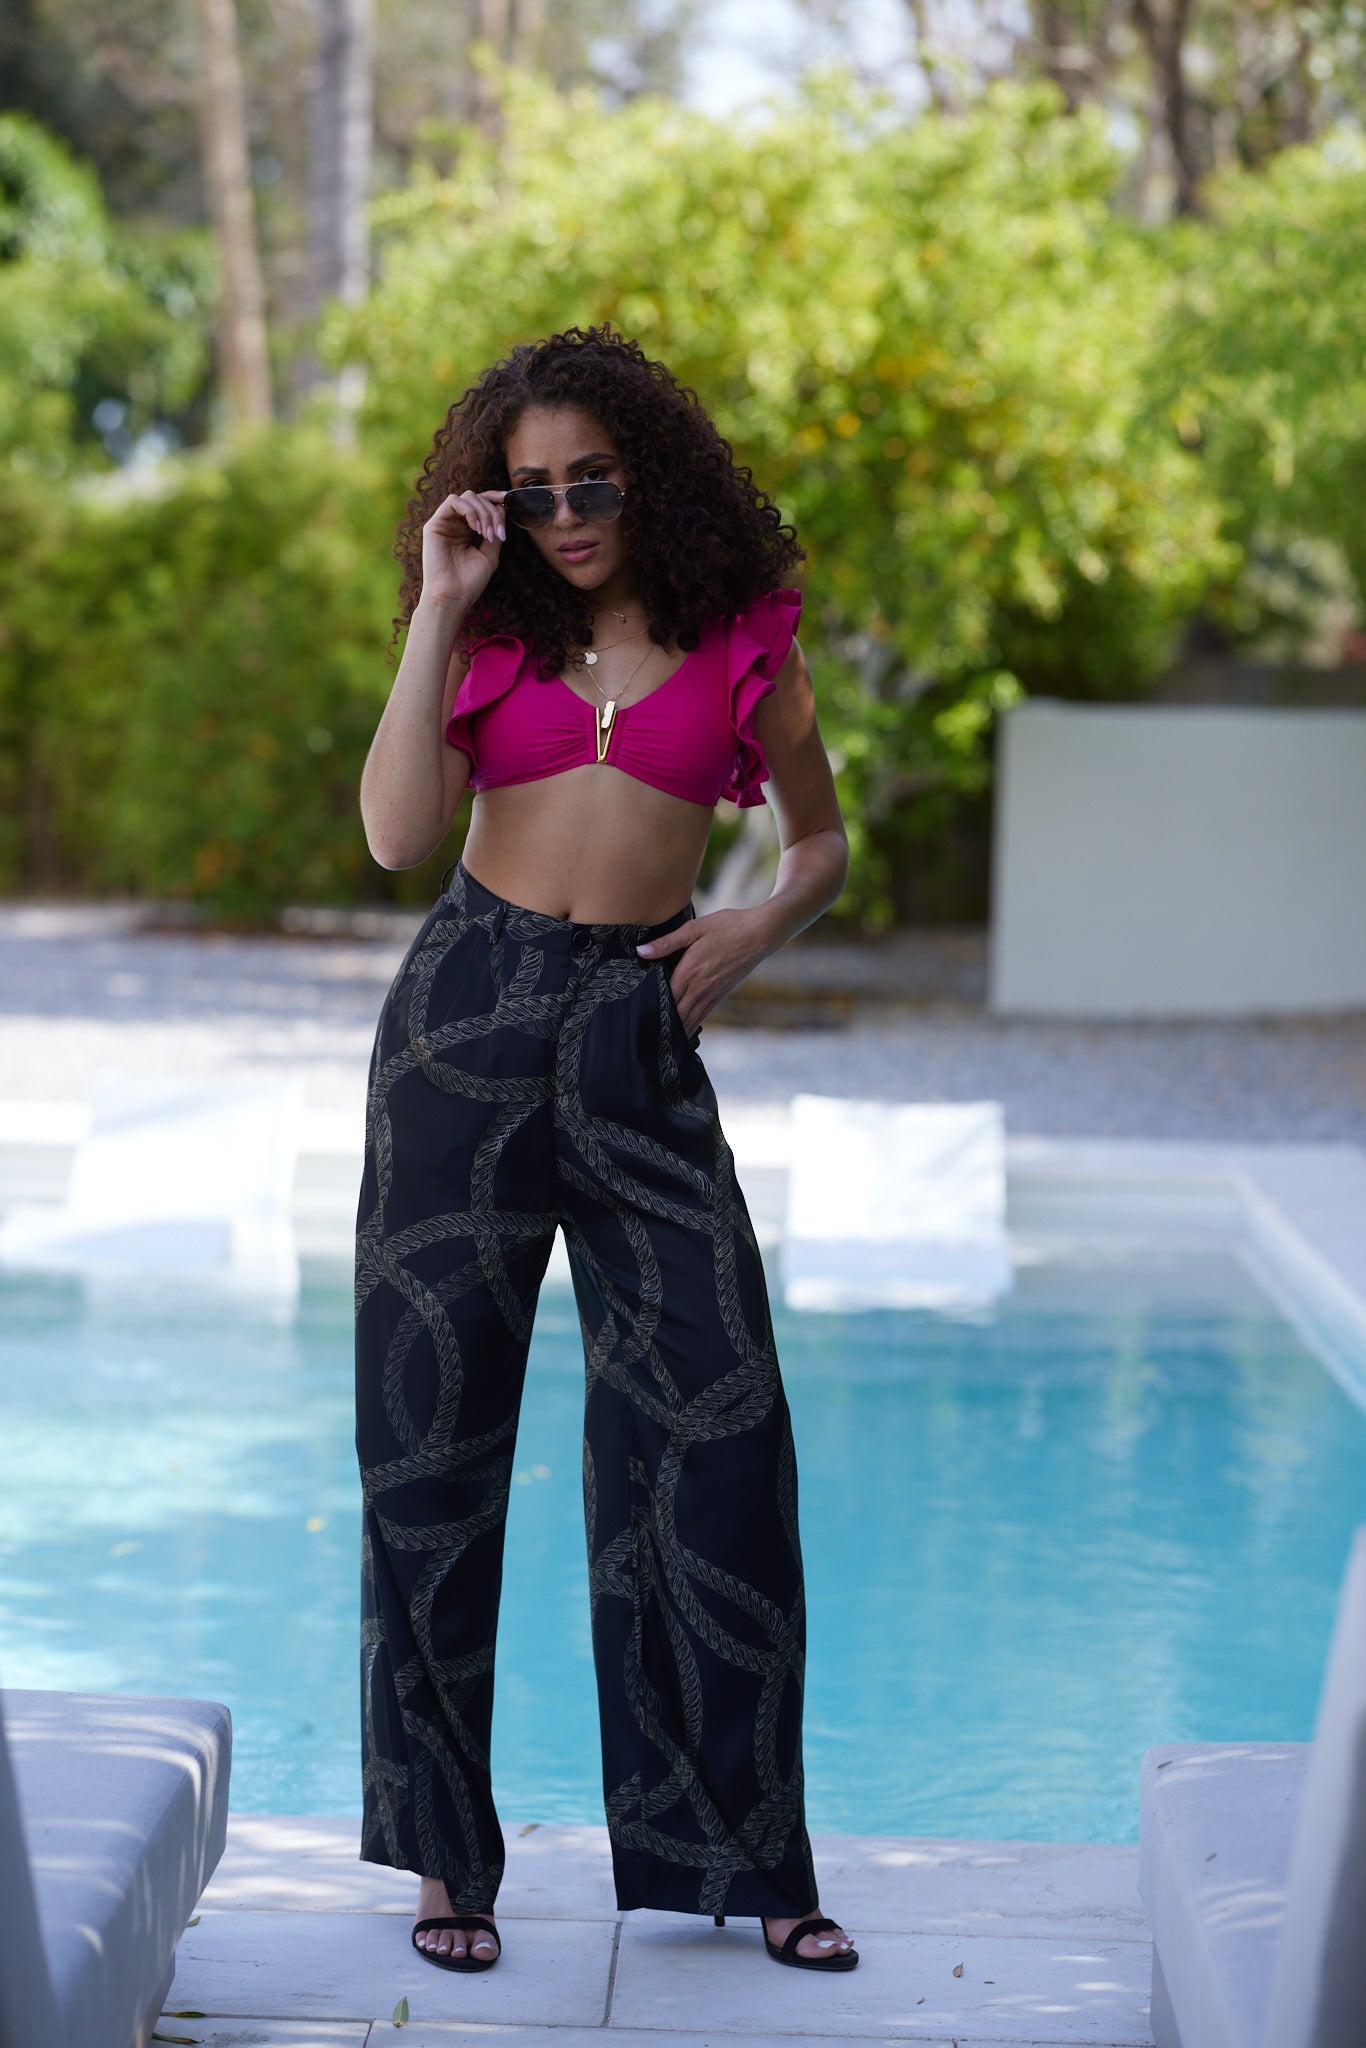 woman poolside wearing gold and black chain printed yacht slacks styling sunglasses and heels